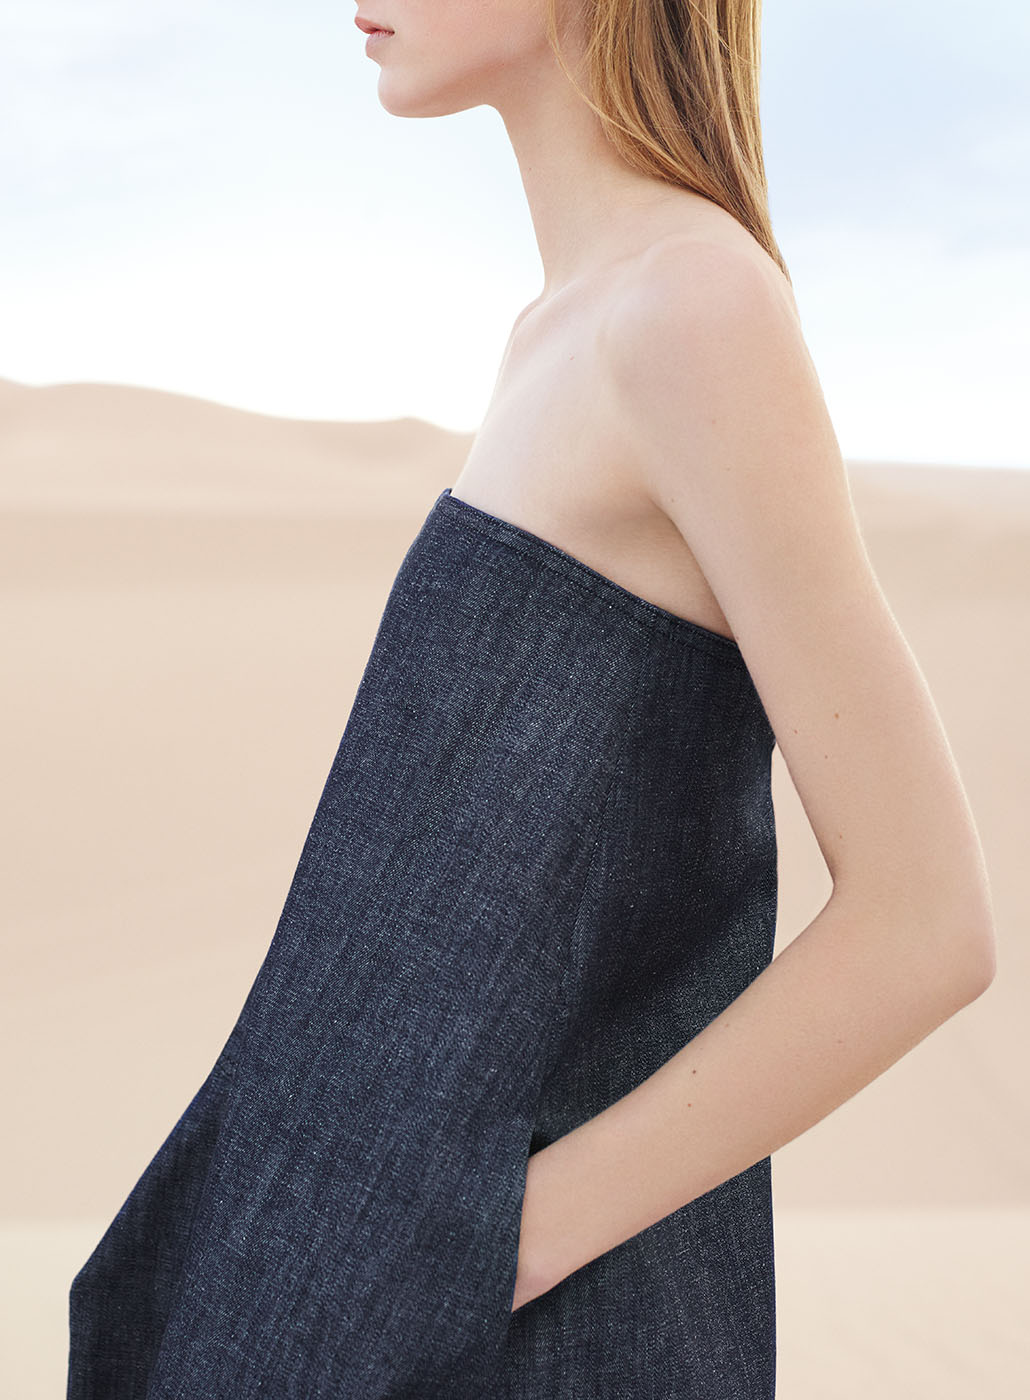 COS summer campaign | minimalistic fashion shooting in the desert